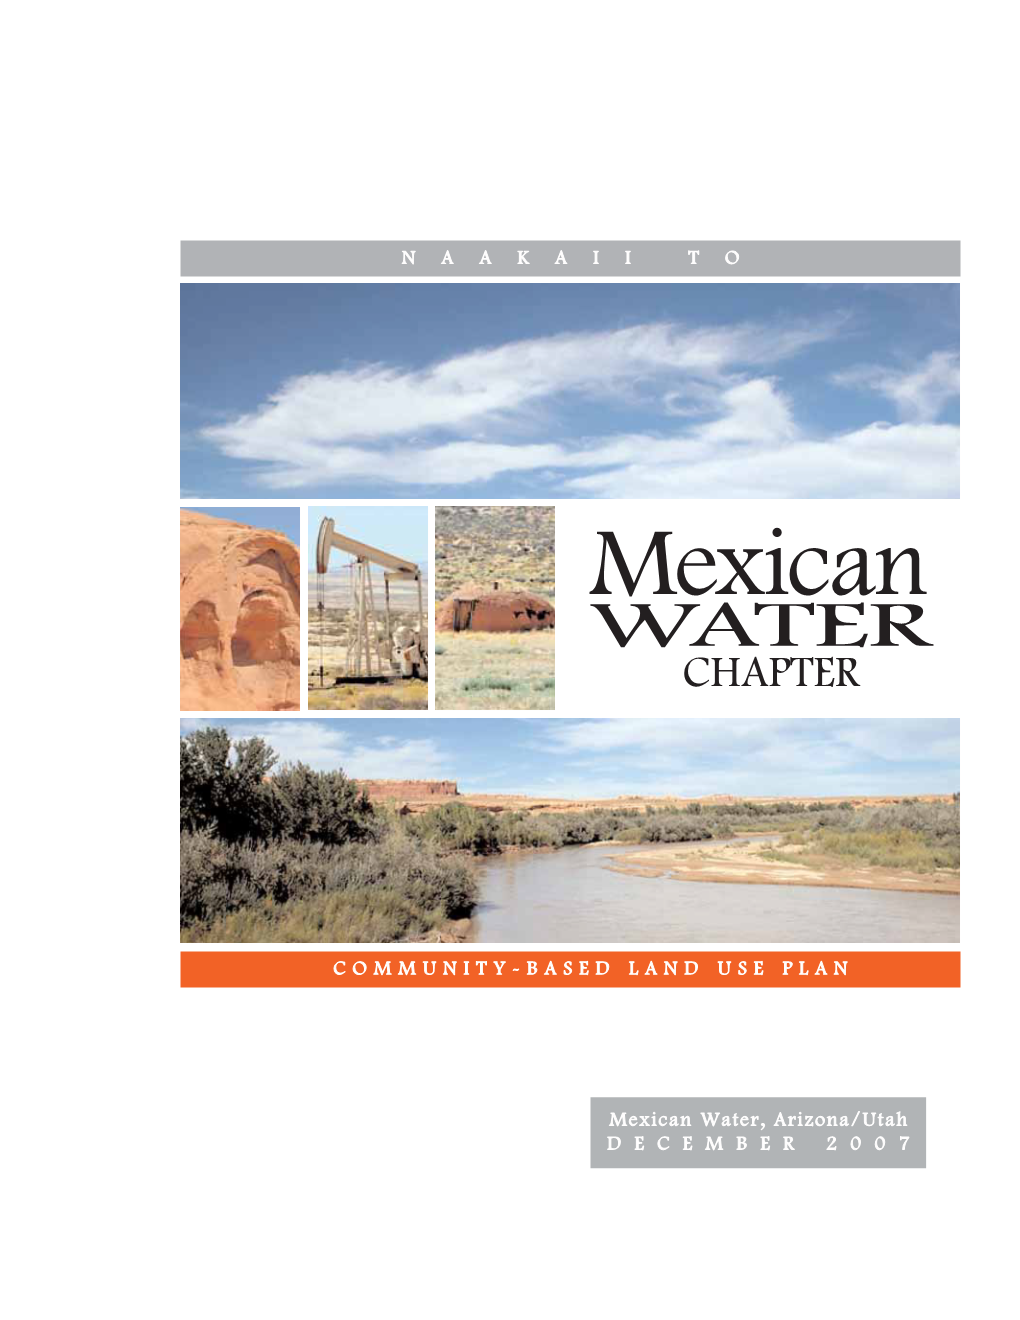 Mexican WATER CHAPTER